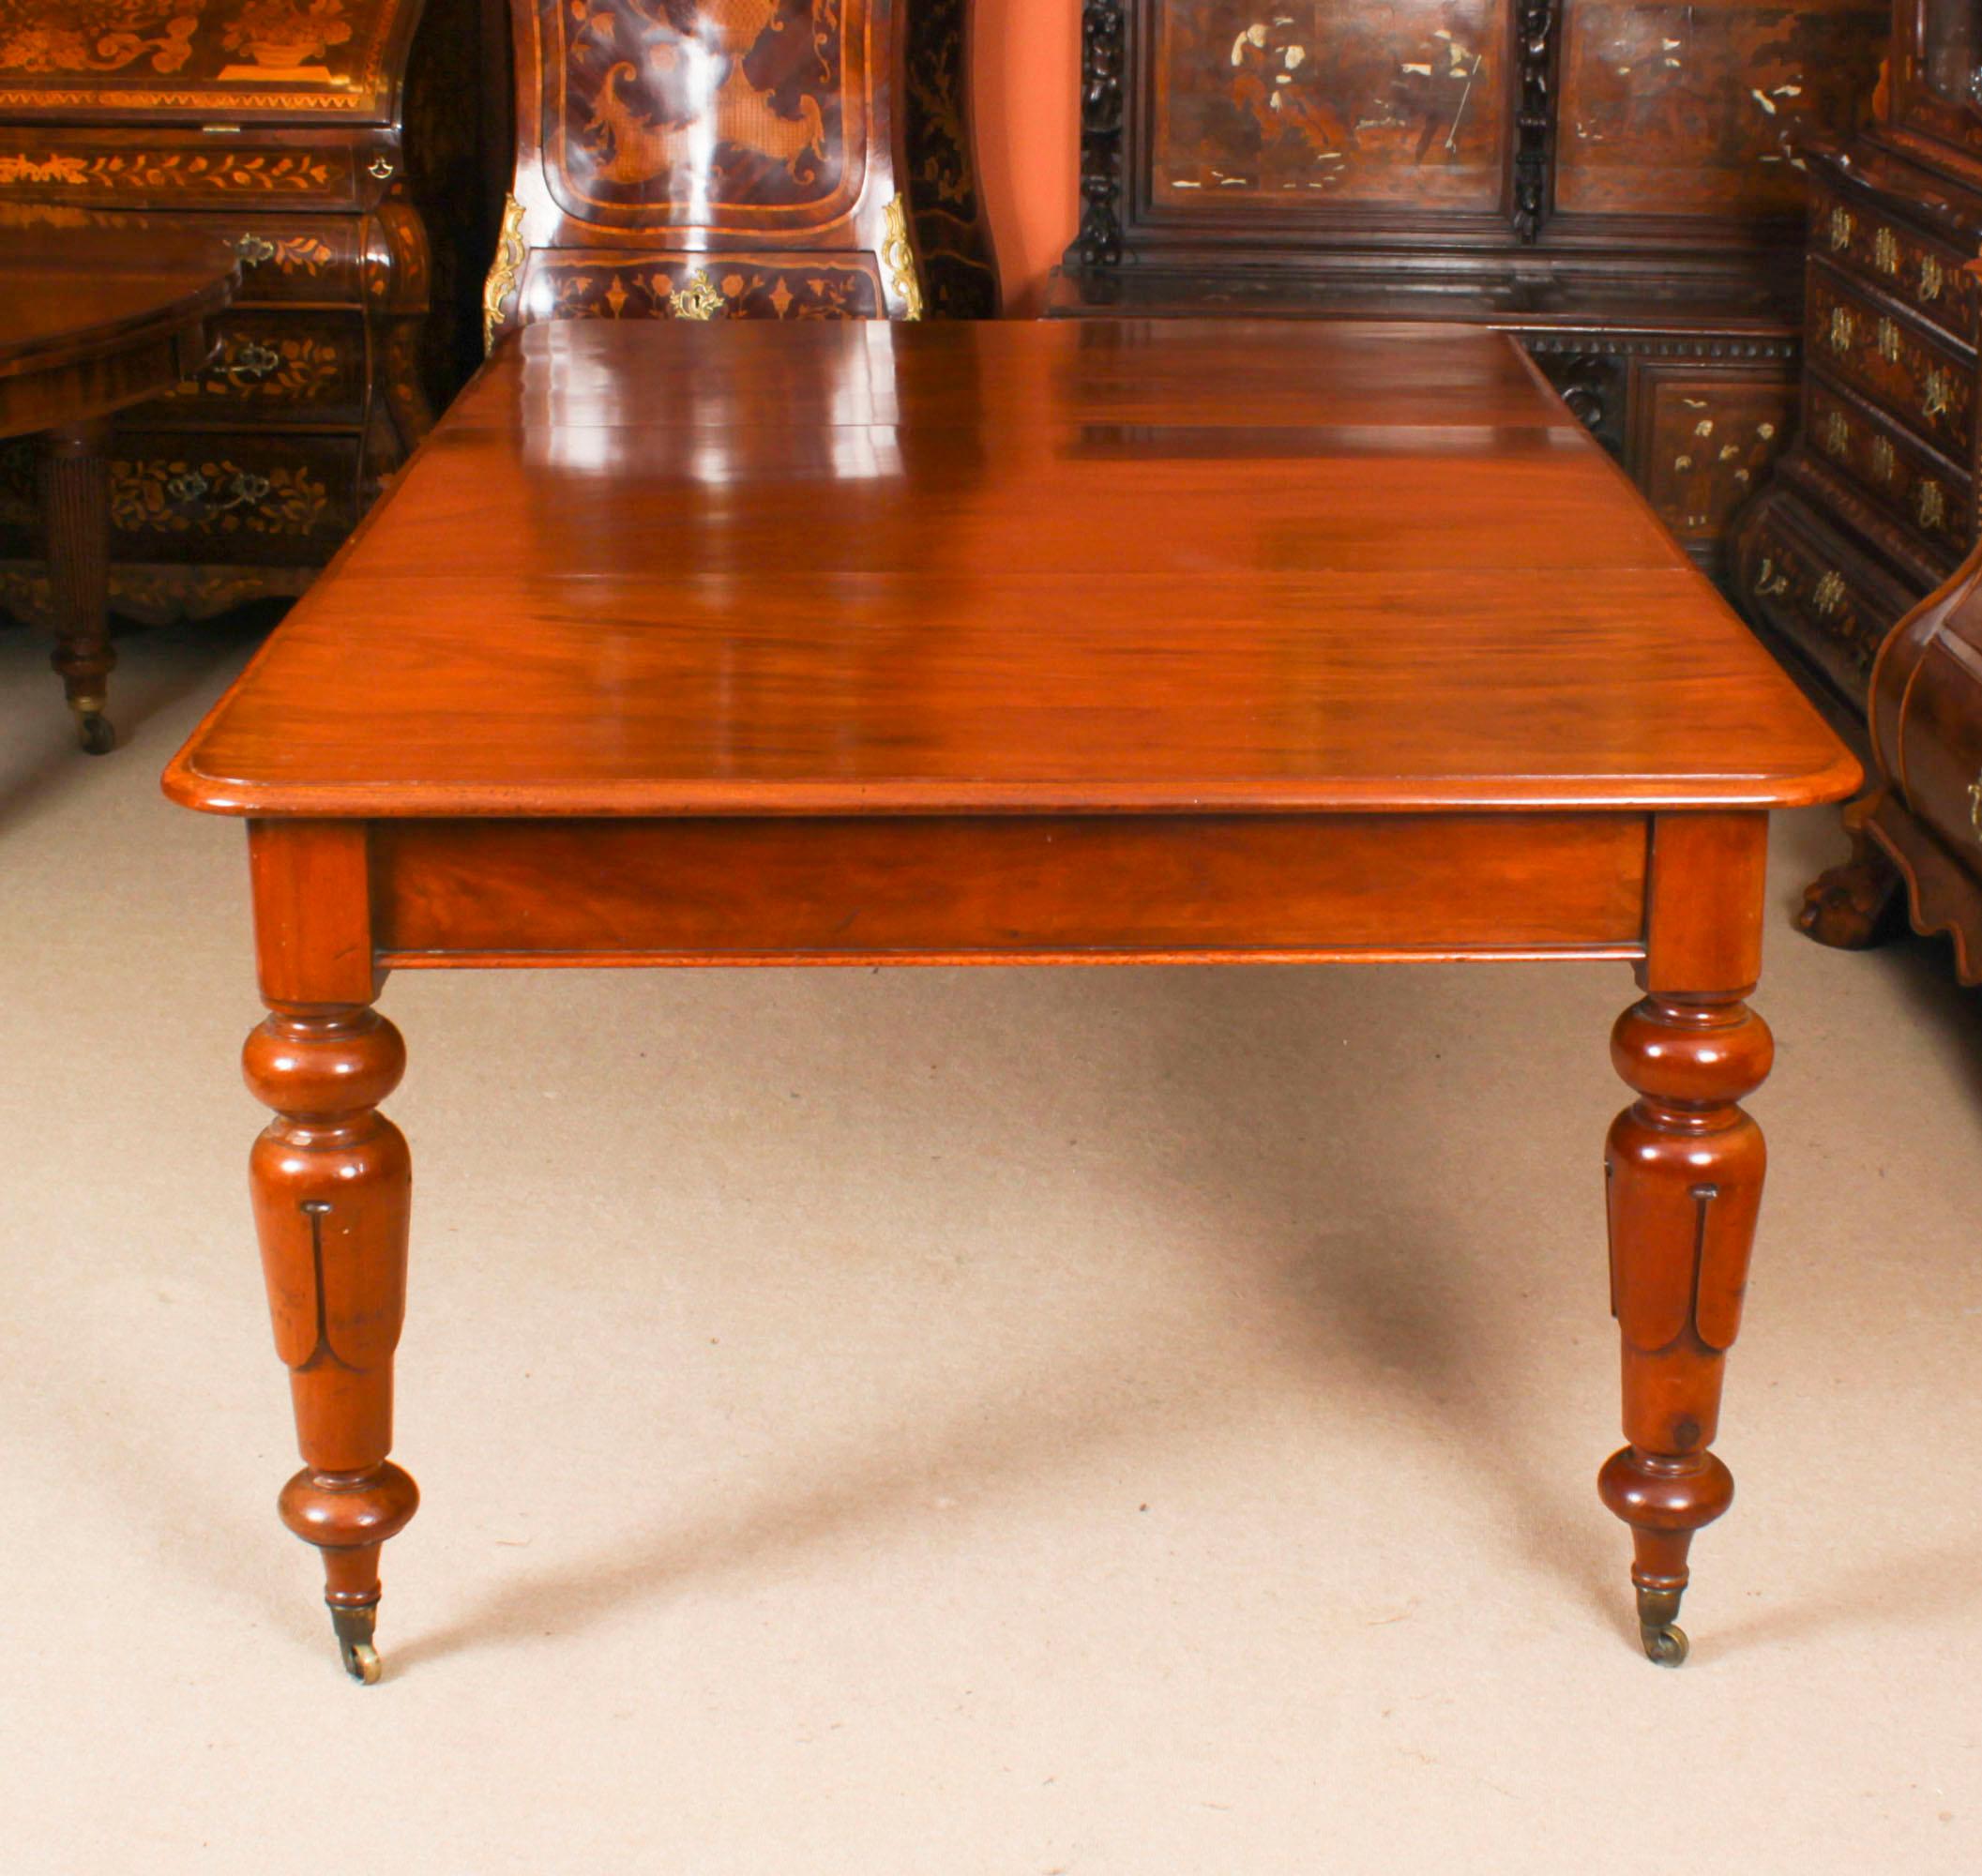 This is a beautiful antique William IV  flame mahogany extending dining table, circa 1835 in date.
 
This amazing table can  seat   eight people in comfort and has been hand-crafted from beautiful solid flame mahogany.
 
The beautifully figured